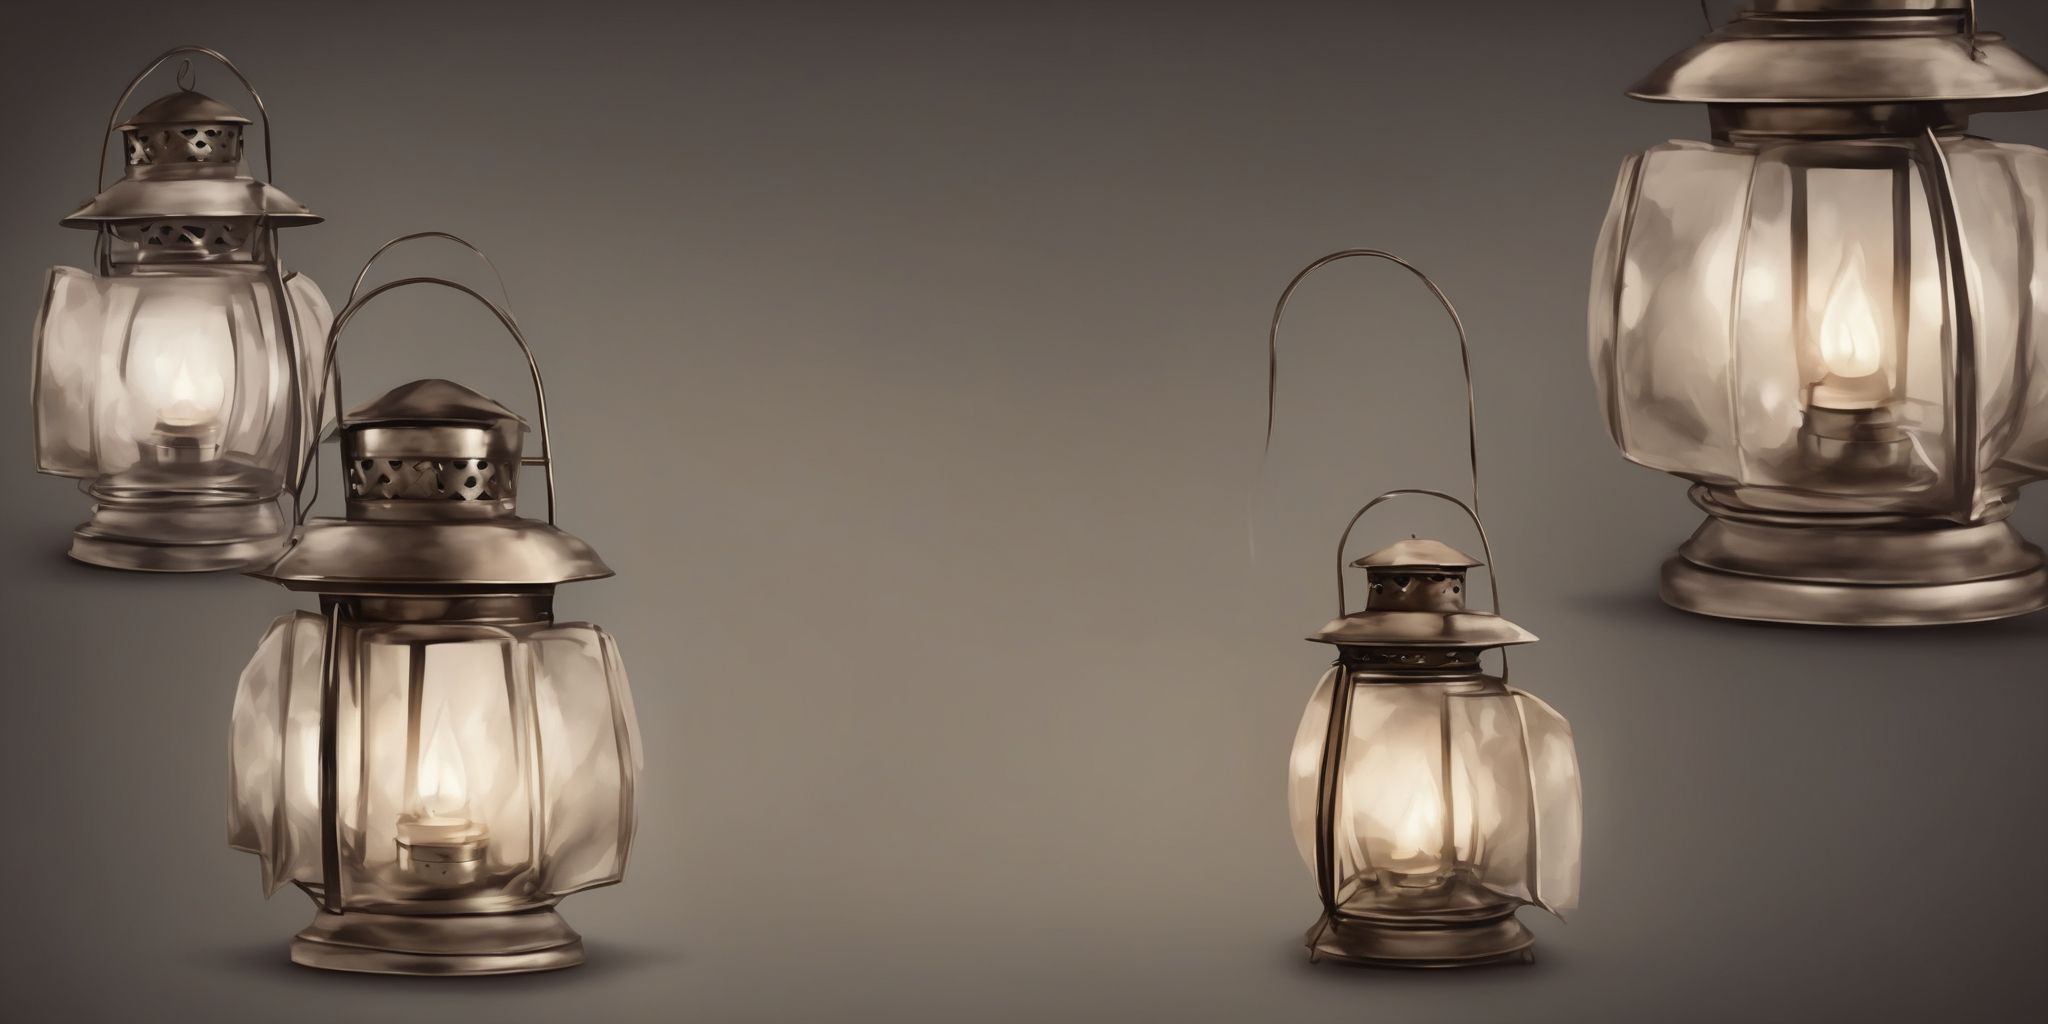 Lantern  in realistic, photographic style